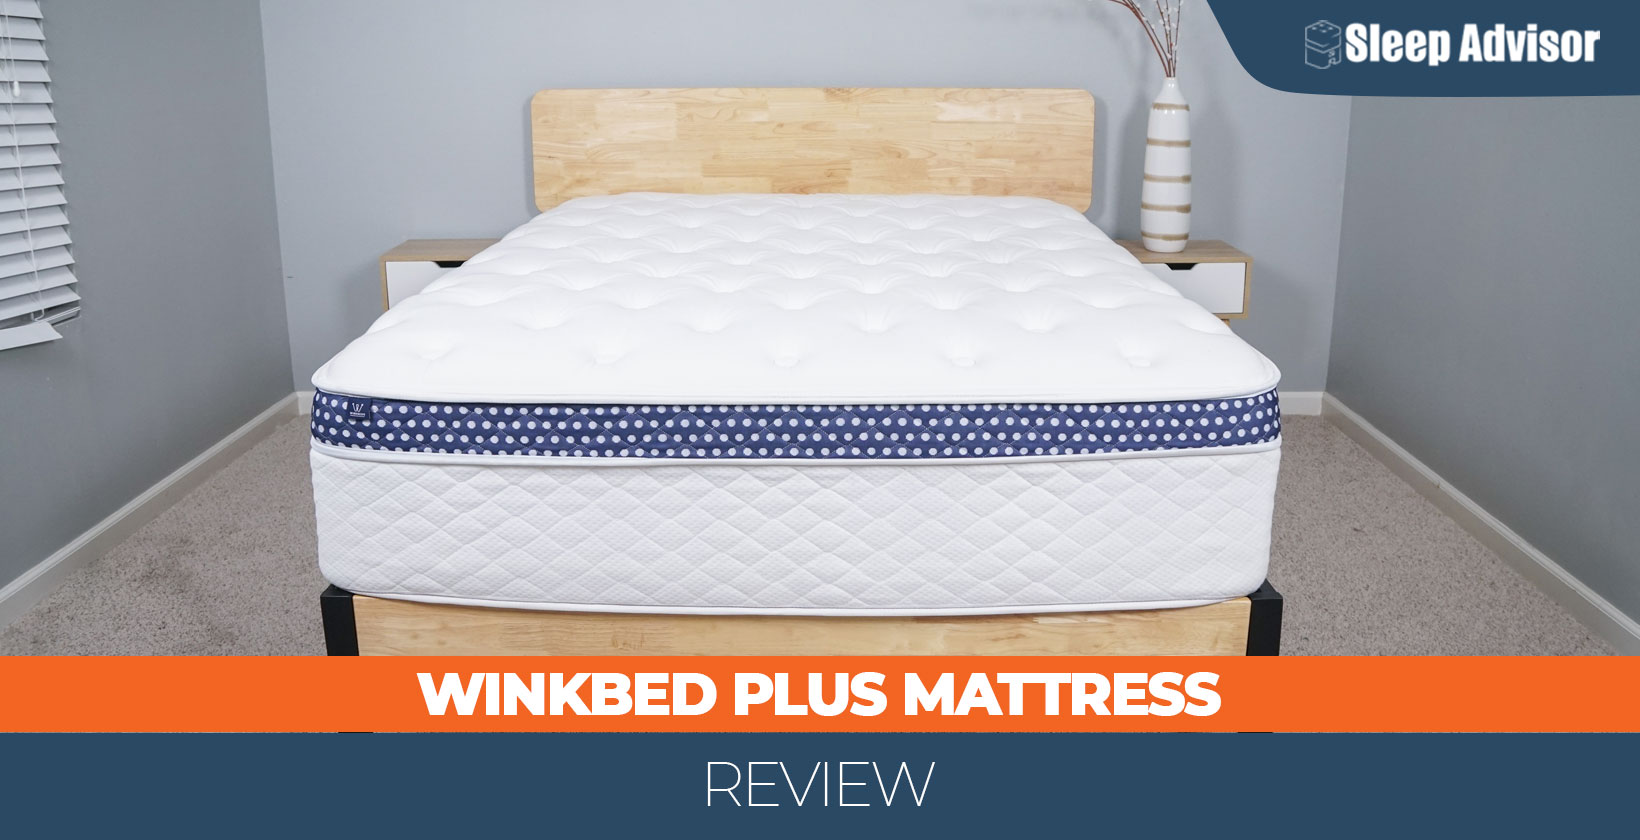 Winkbed Plus Mattress Review and Prices